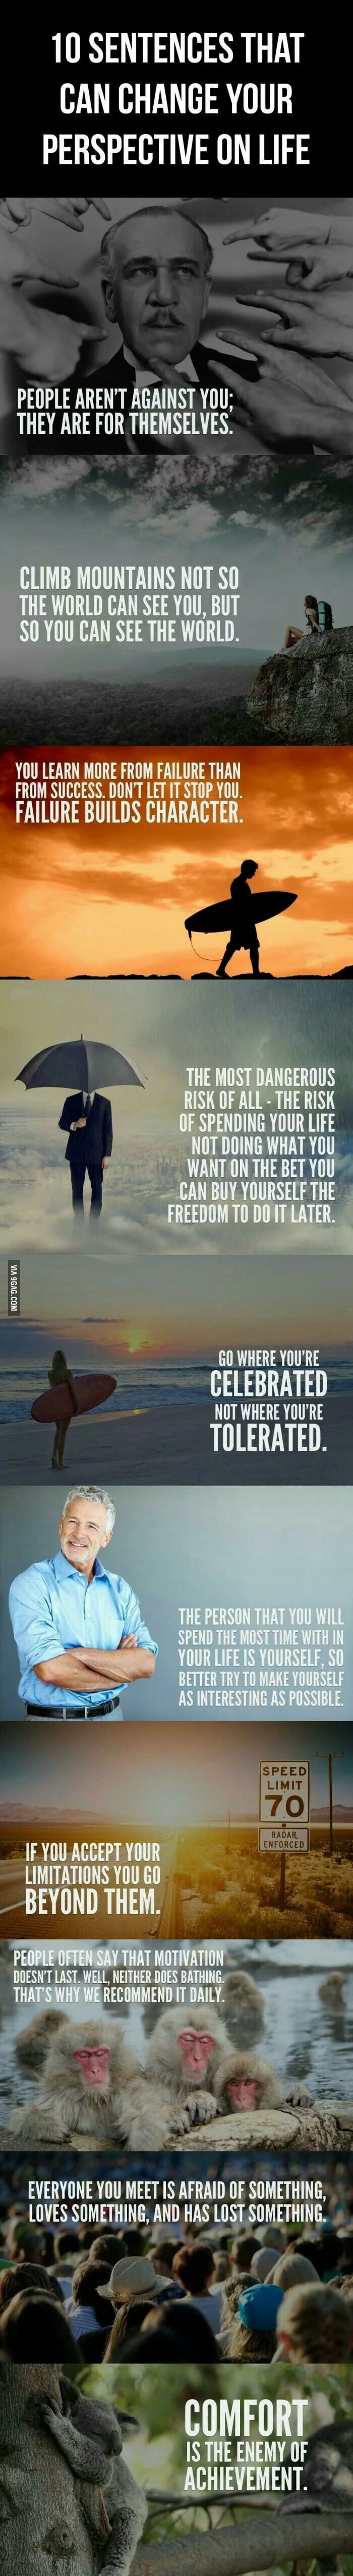 Rules to live by - 9GAG